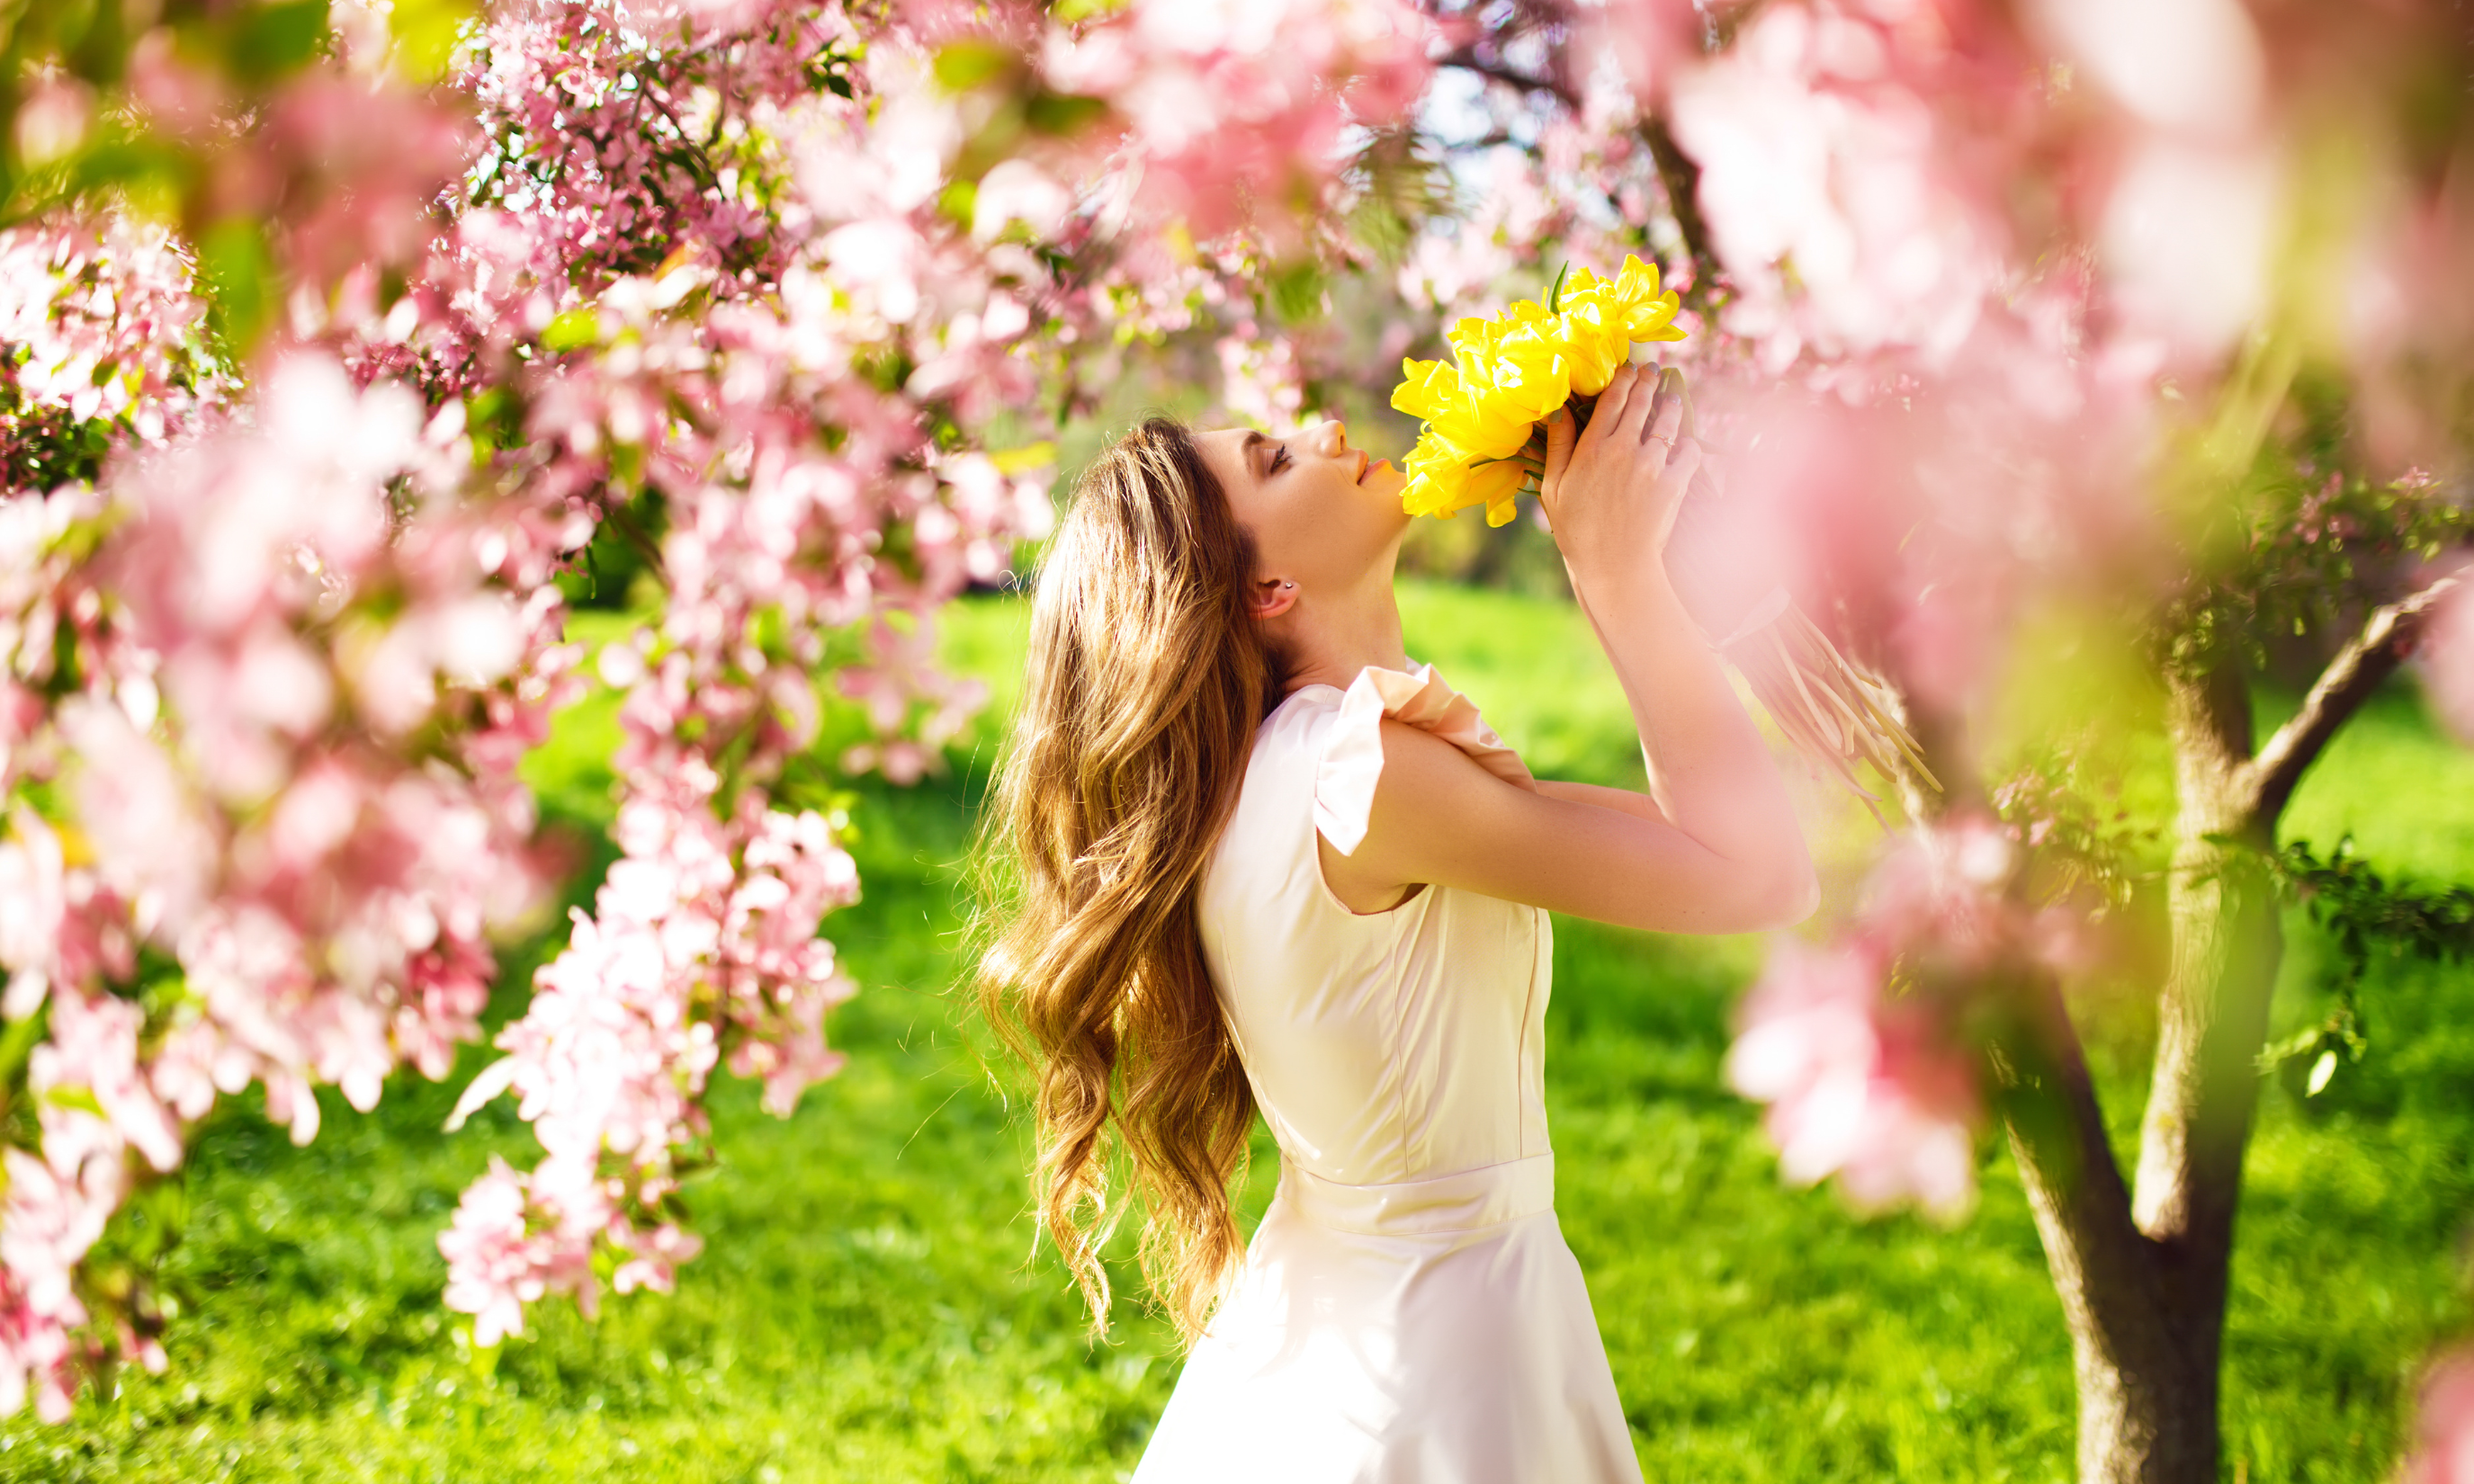 Get Radiant with April Specials